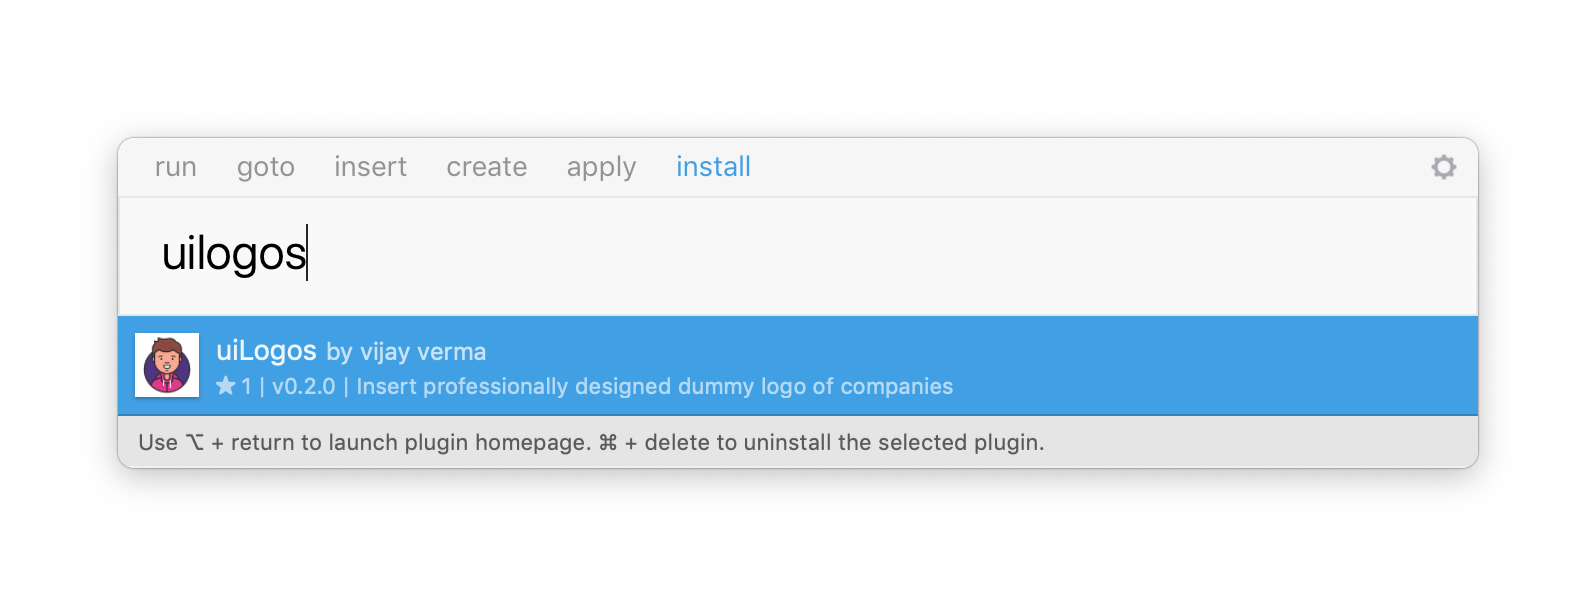 Github Realvjy Uilogos Sketch Plugin Sketch Plugin To Insert Professionally Designed Dummy Logos Of Companies And 190 Country Flag Into Sketchapp